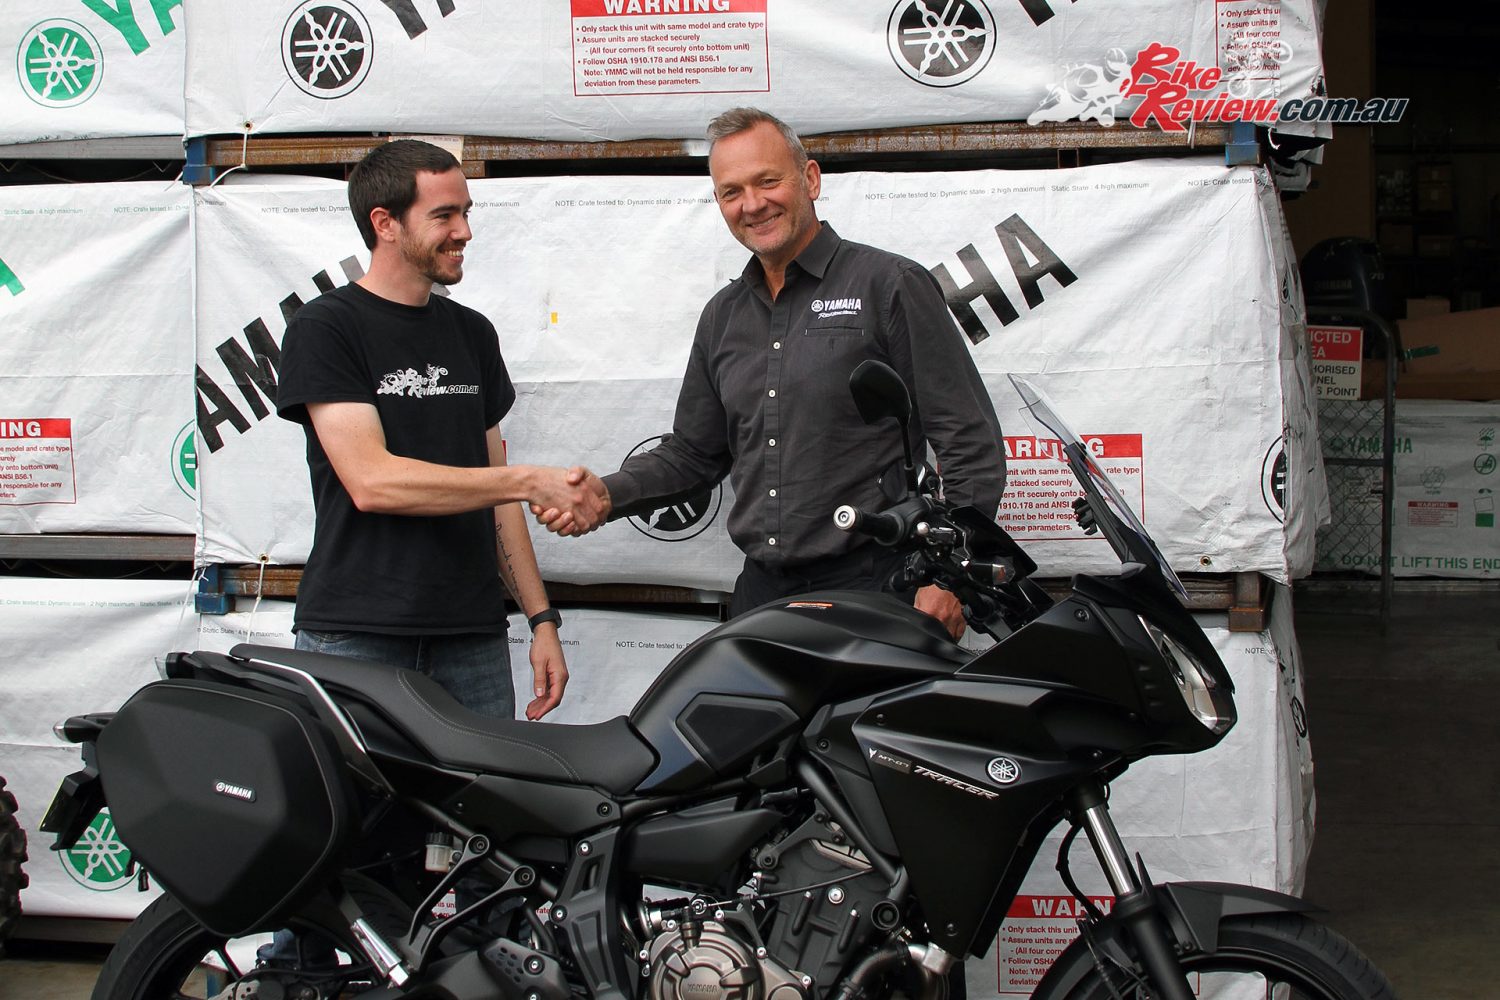 Kris from BikeReview.com.au gets the keys to the 2017 Yamaha MT-07 Tracer Long Termer from Yamaha's Sean Goldhawk